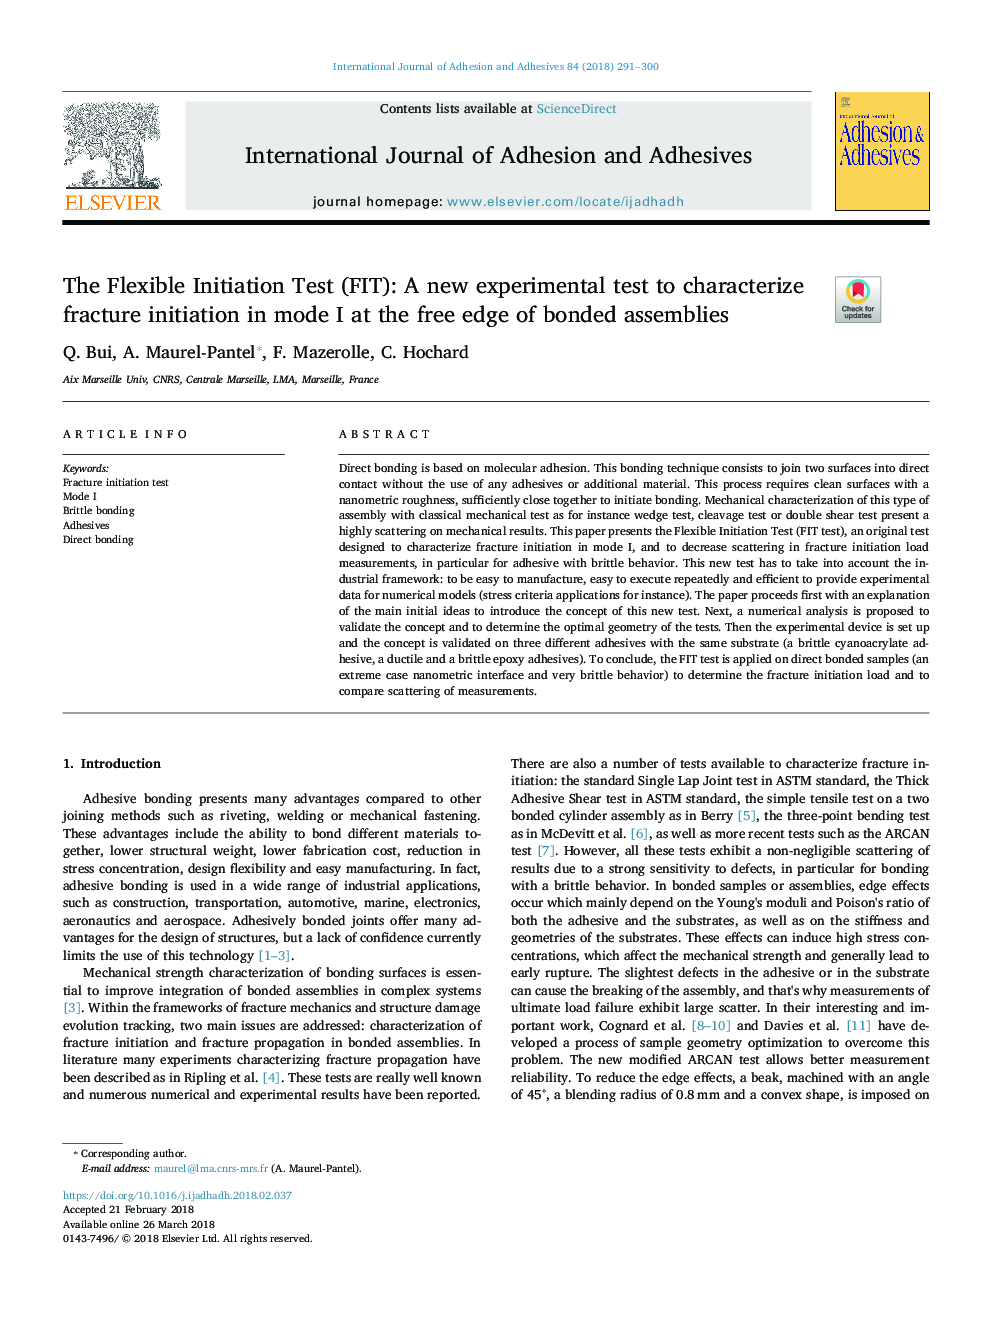 The Flexible Initiation Test (FIT): A new experimental test to characterize fracture initiation in mode I at the free edge of bonded assemblies